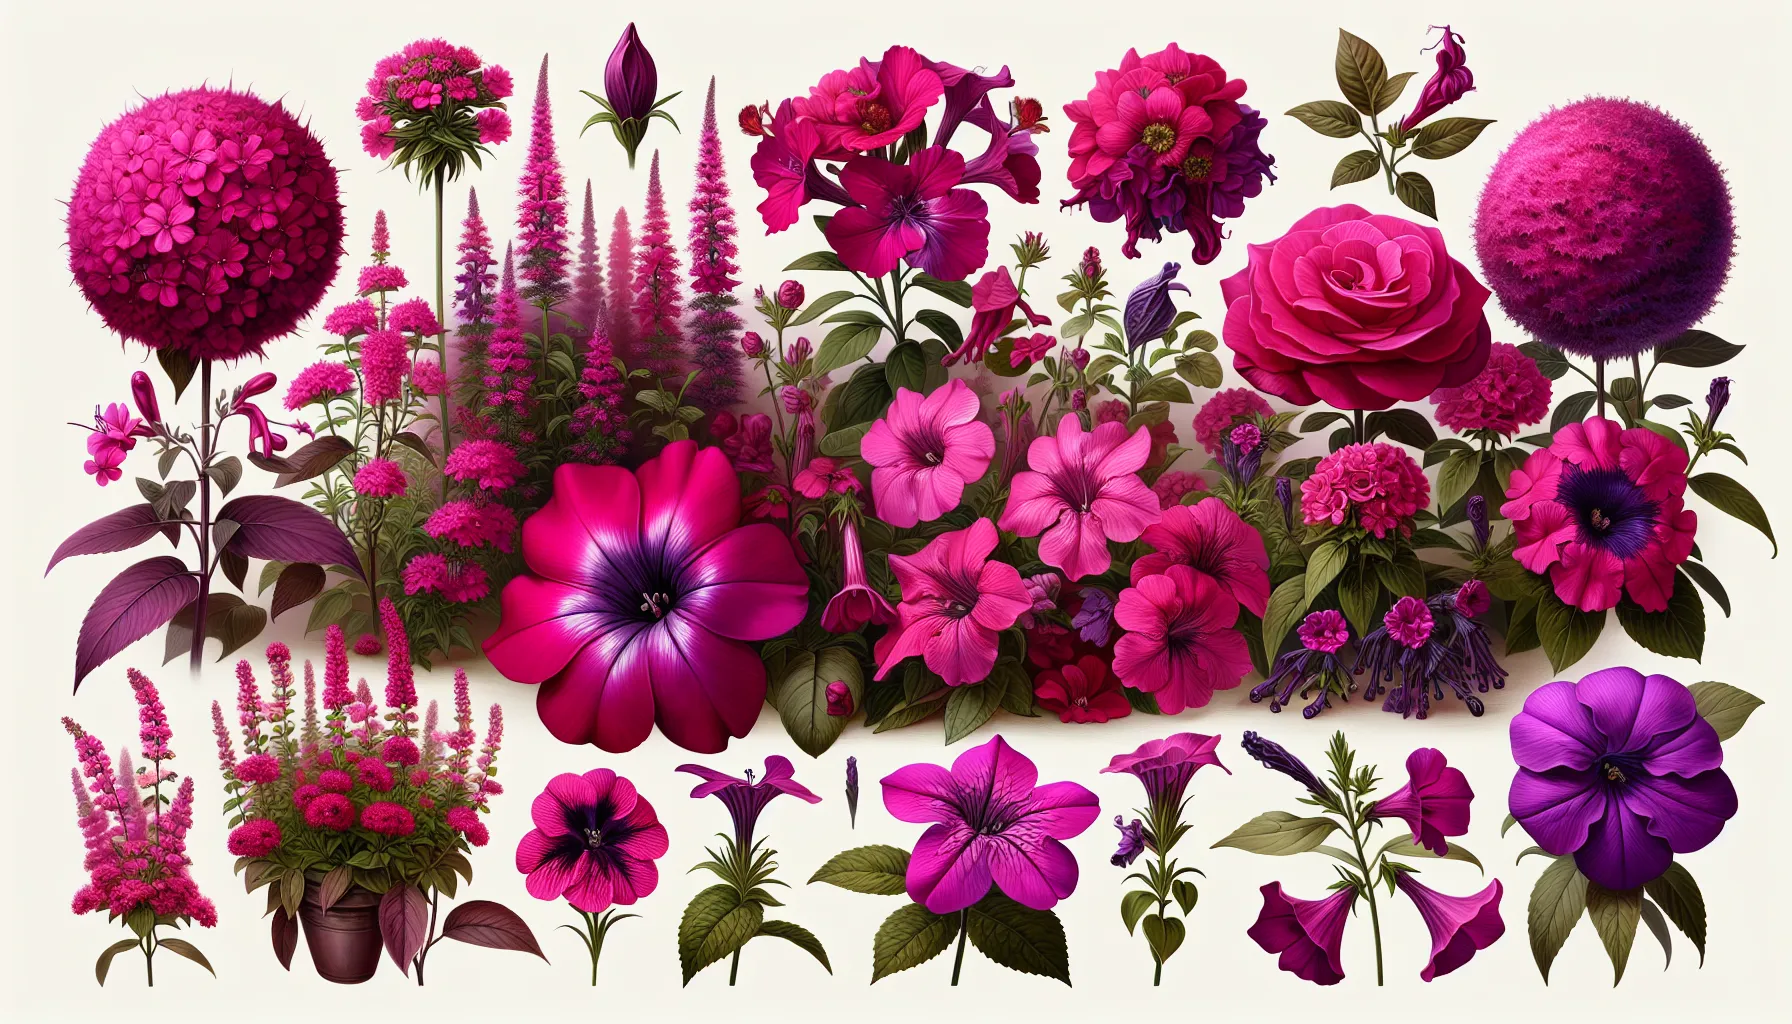 A variety of magenta flowers, including roses, tulips, and petunias, are arranged in a lush, artistic display.